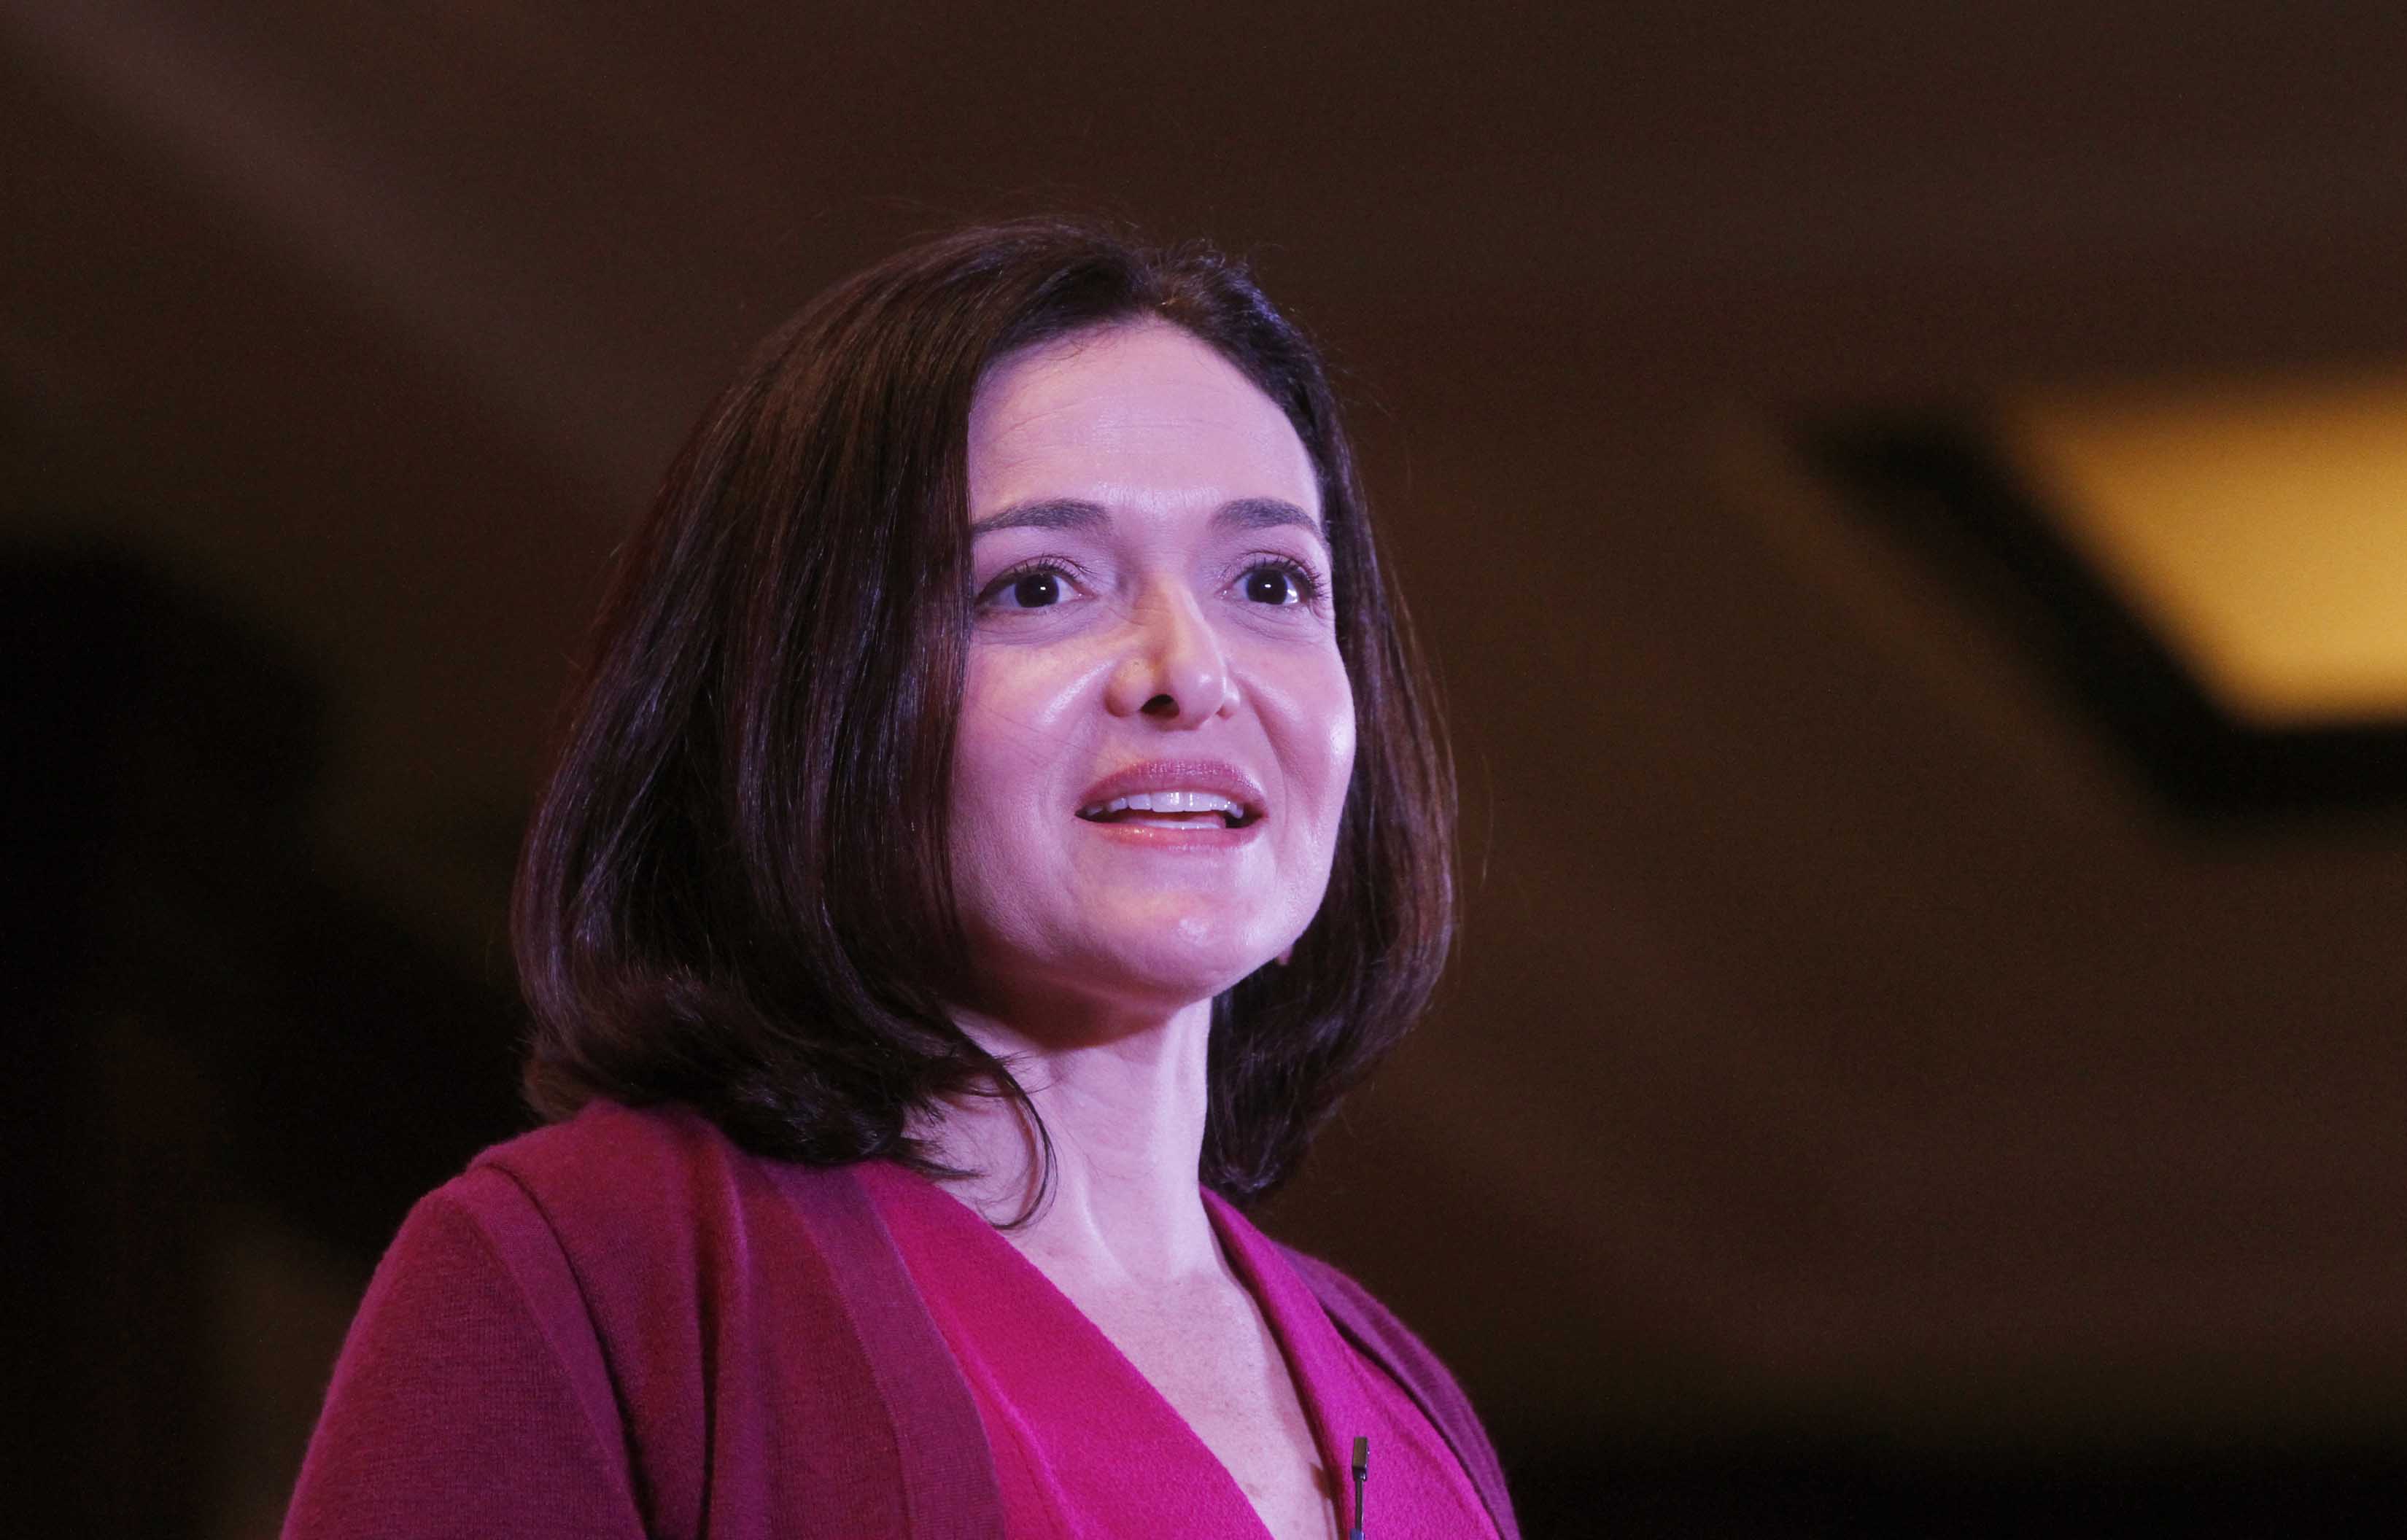 Sheryl Sandberg at an interactive session organized by FICCI Ladies Organisation in New Delhi on July 2, 2014. (Sanjeev Verma—Hindustan Times via Getty Images)